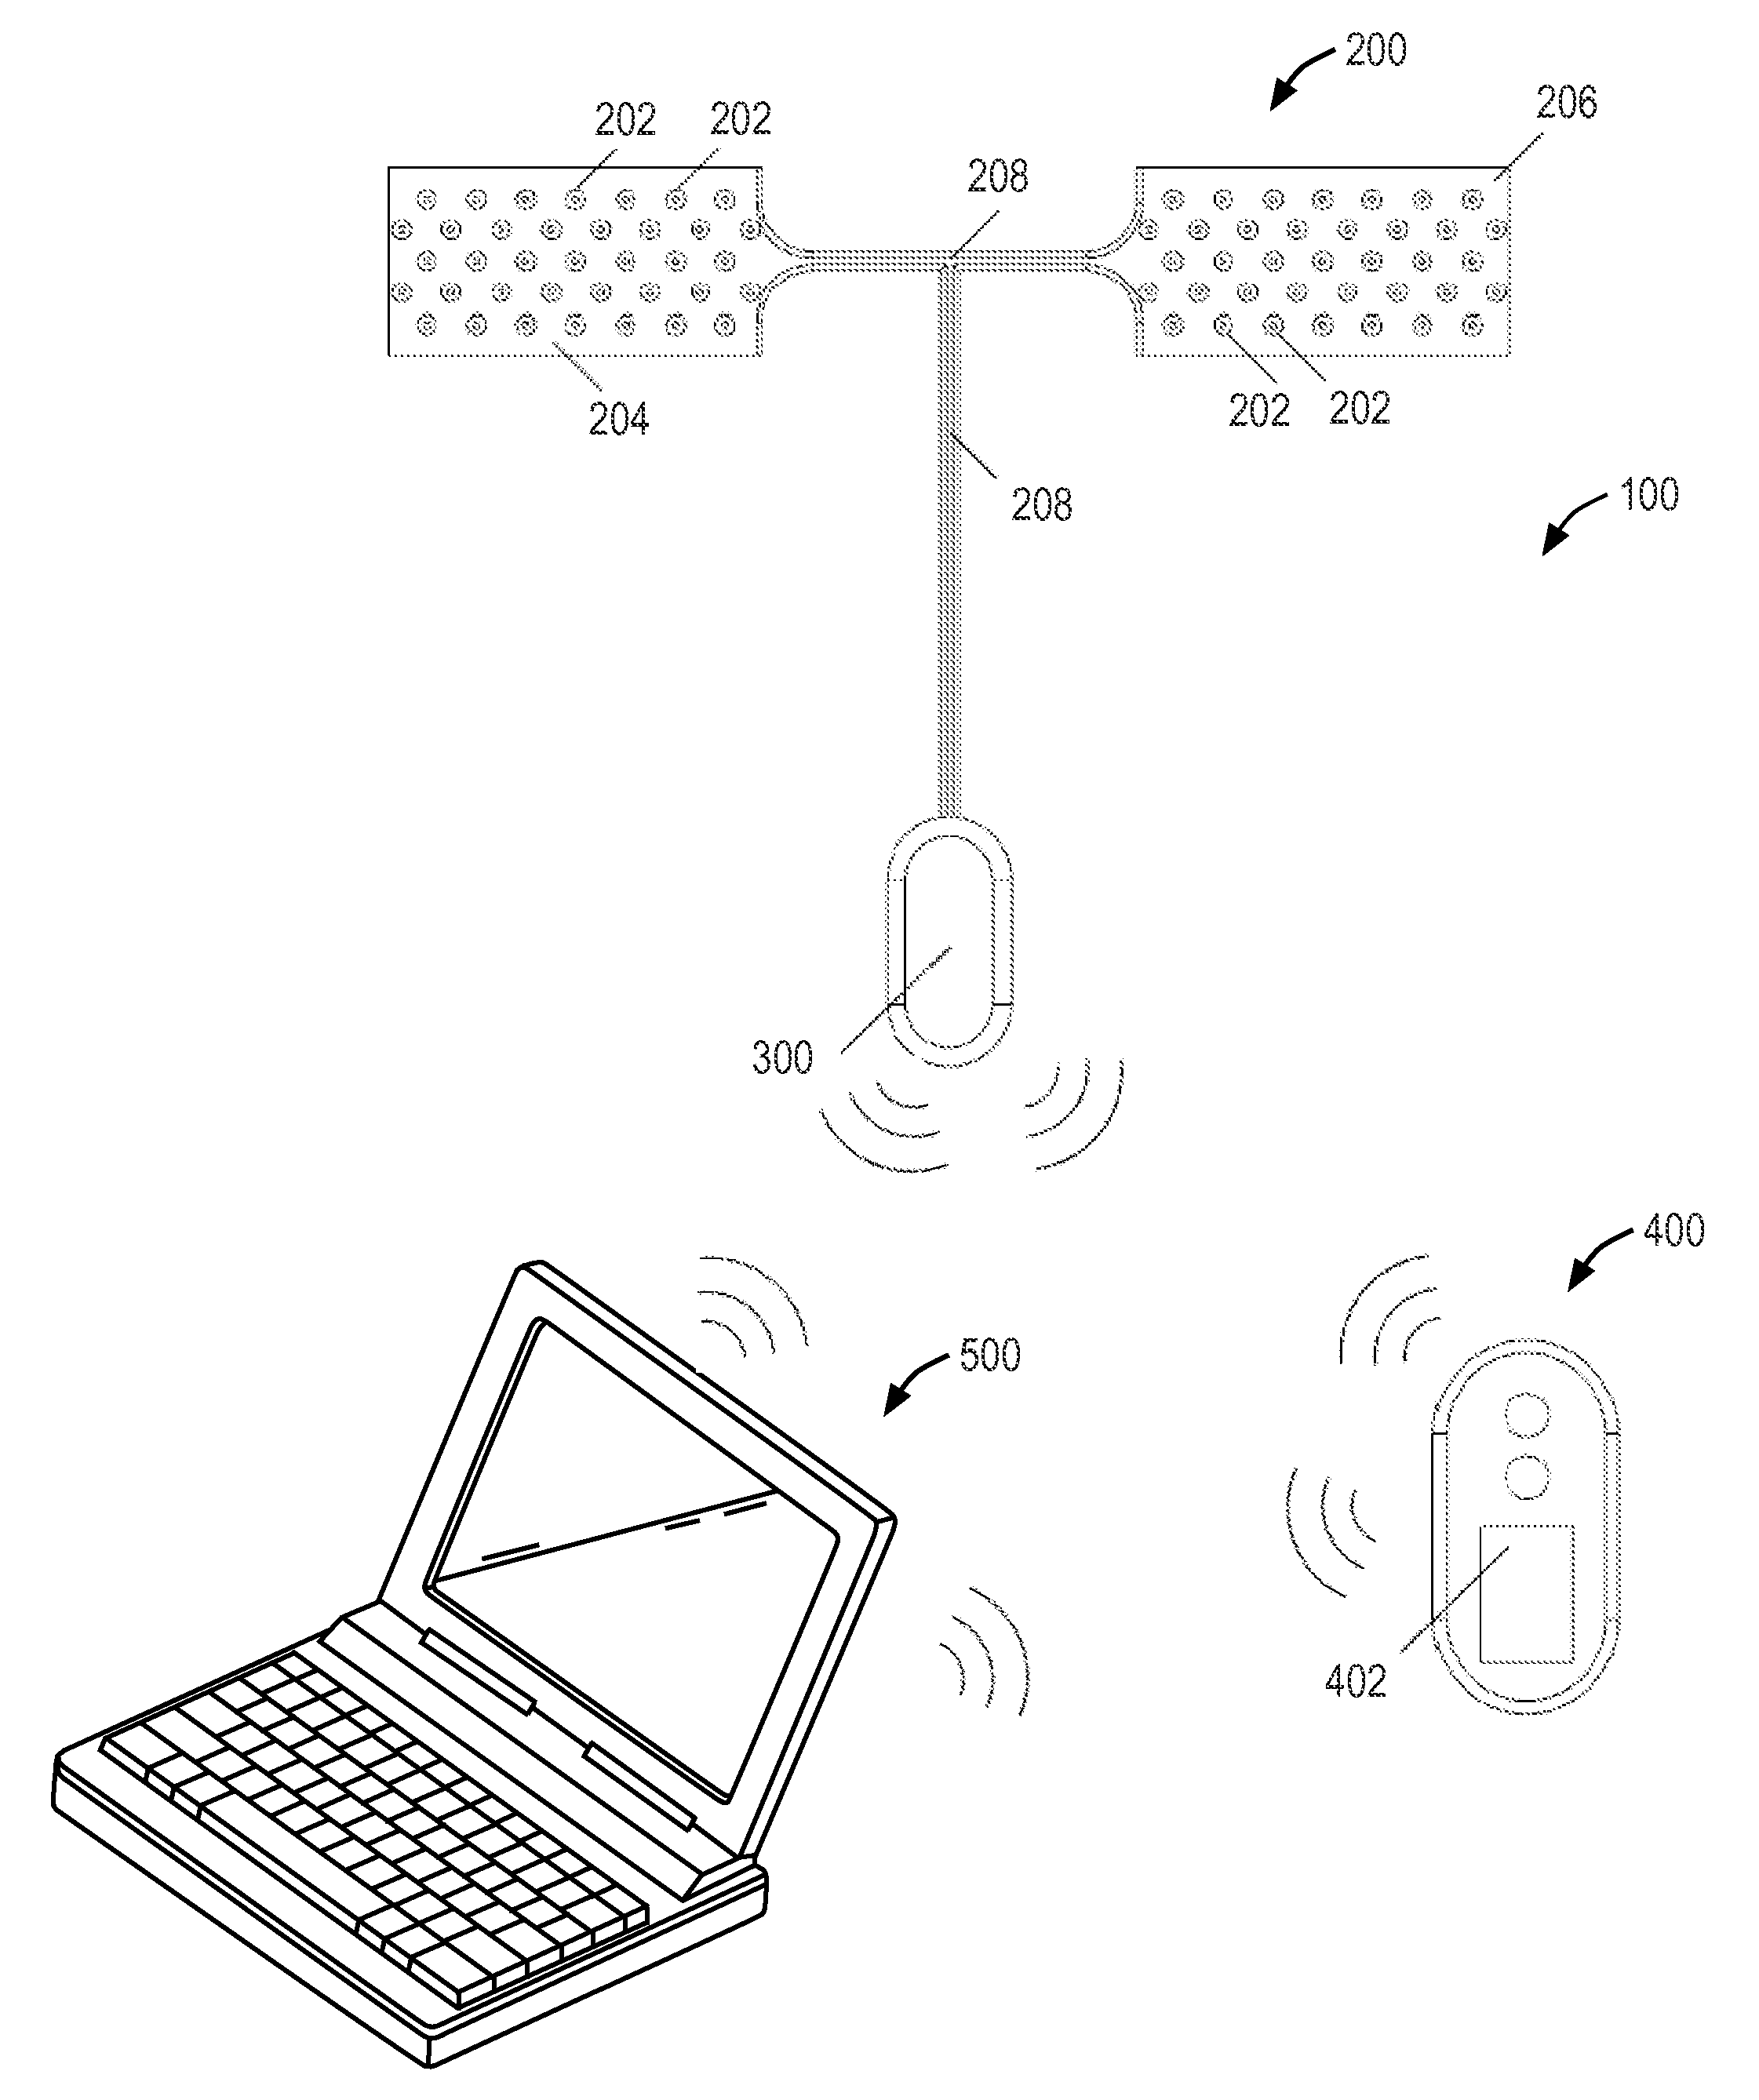 Systems and methods for treating sexual disorders using electro-stimulation